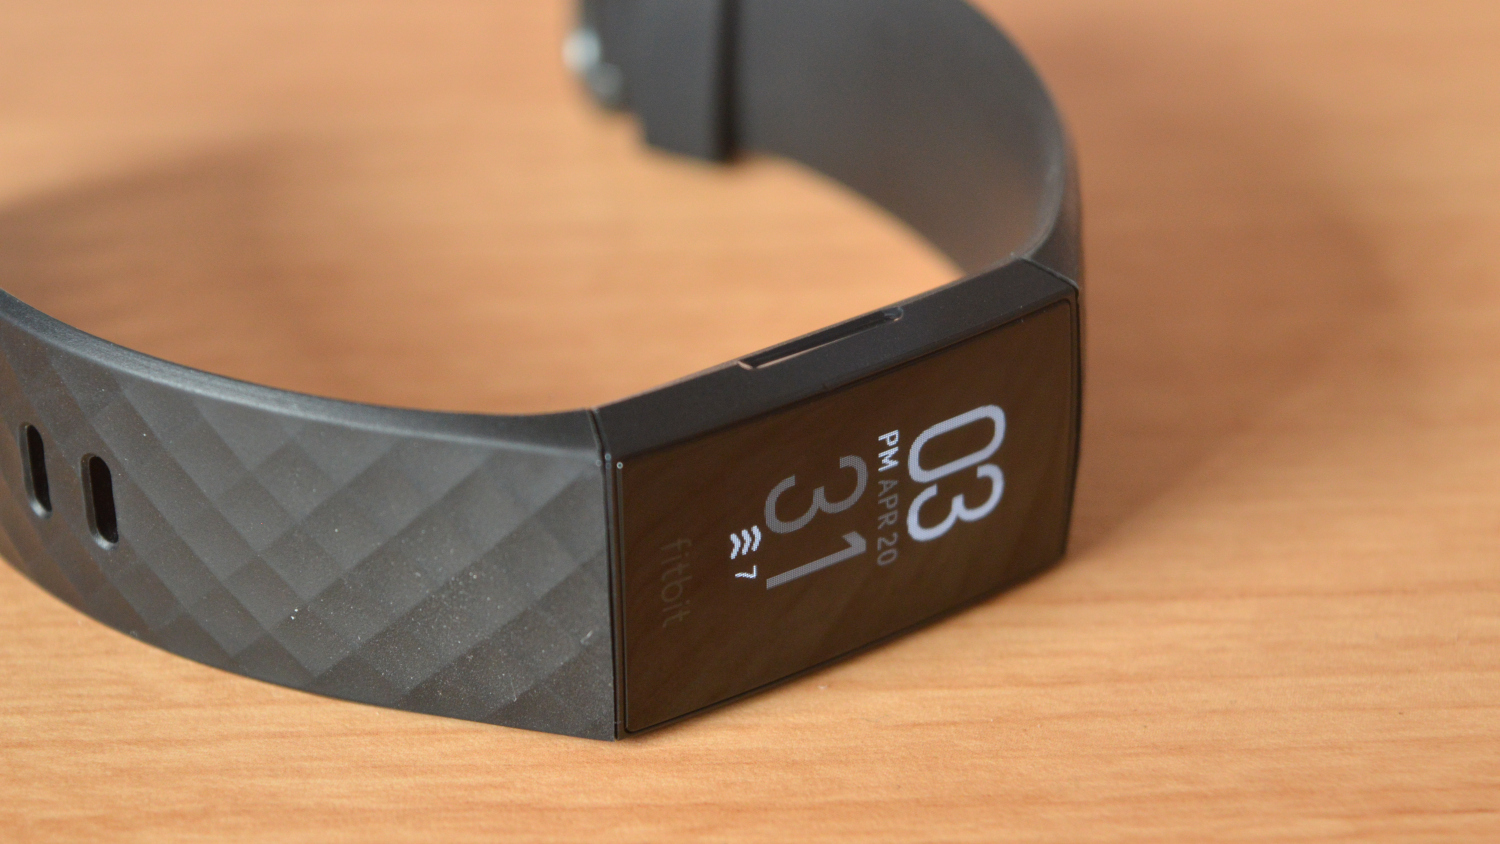 The Fitbit Charge 4 is a more powerful fitness tracker hidden in